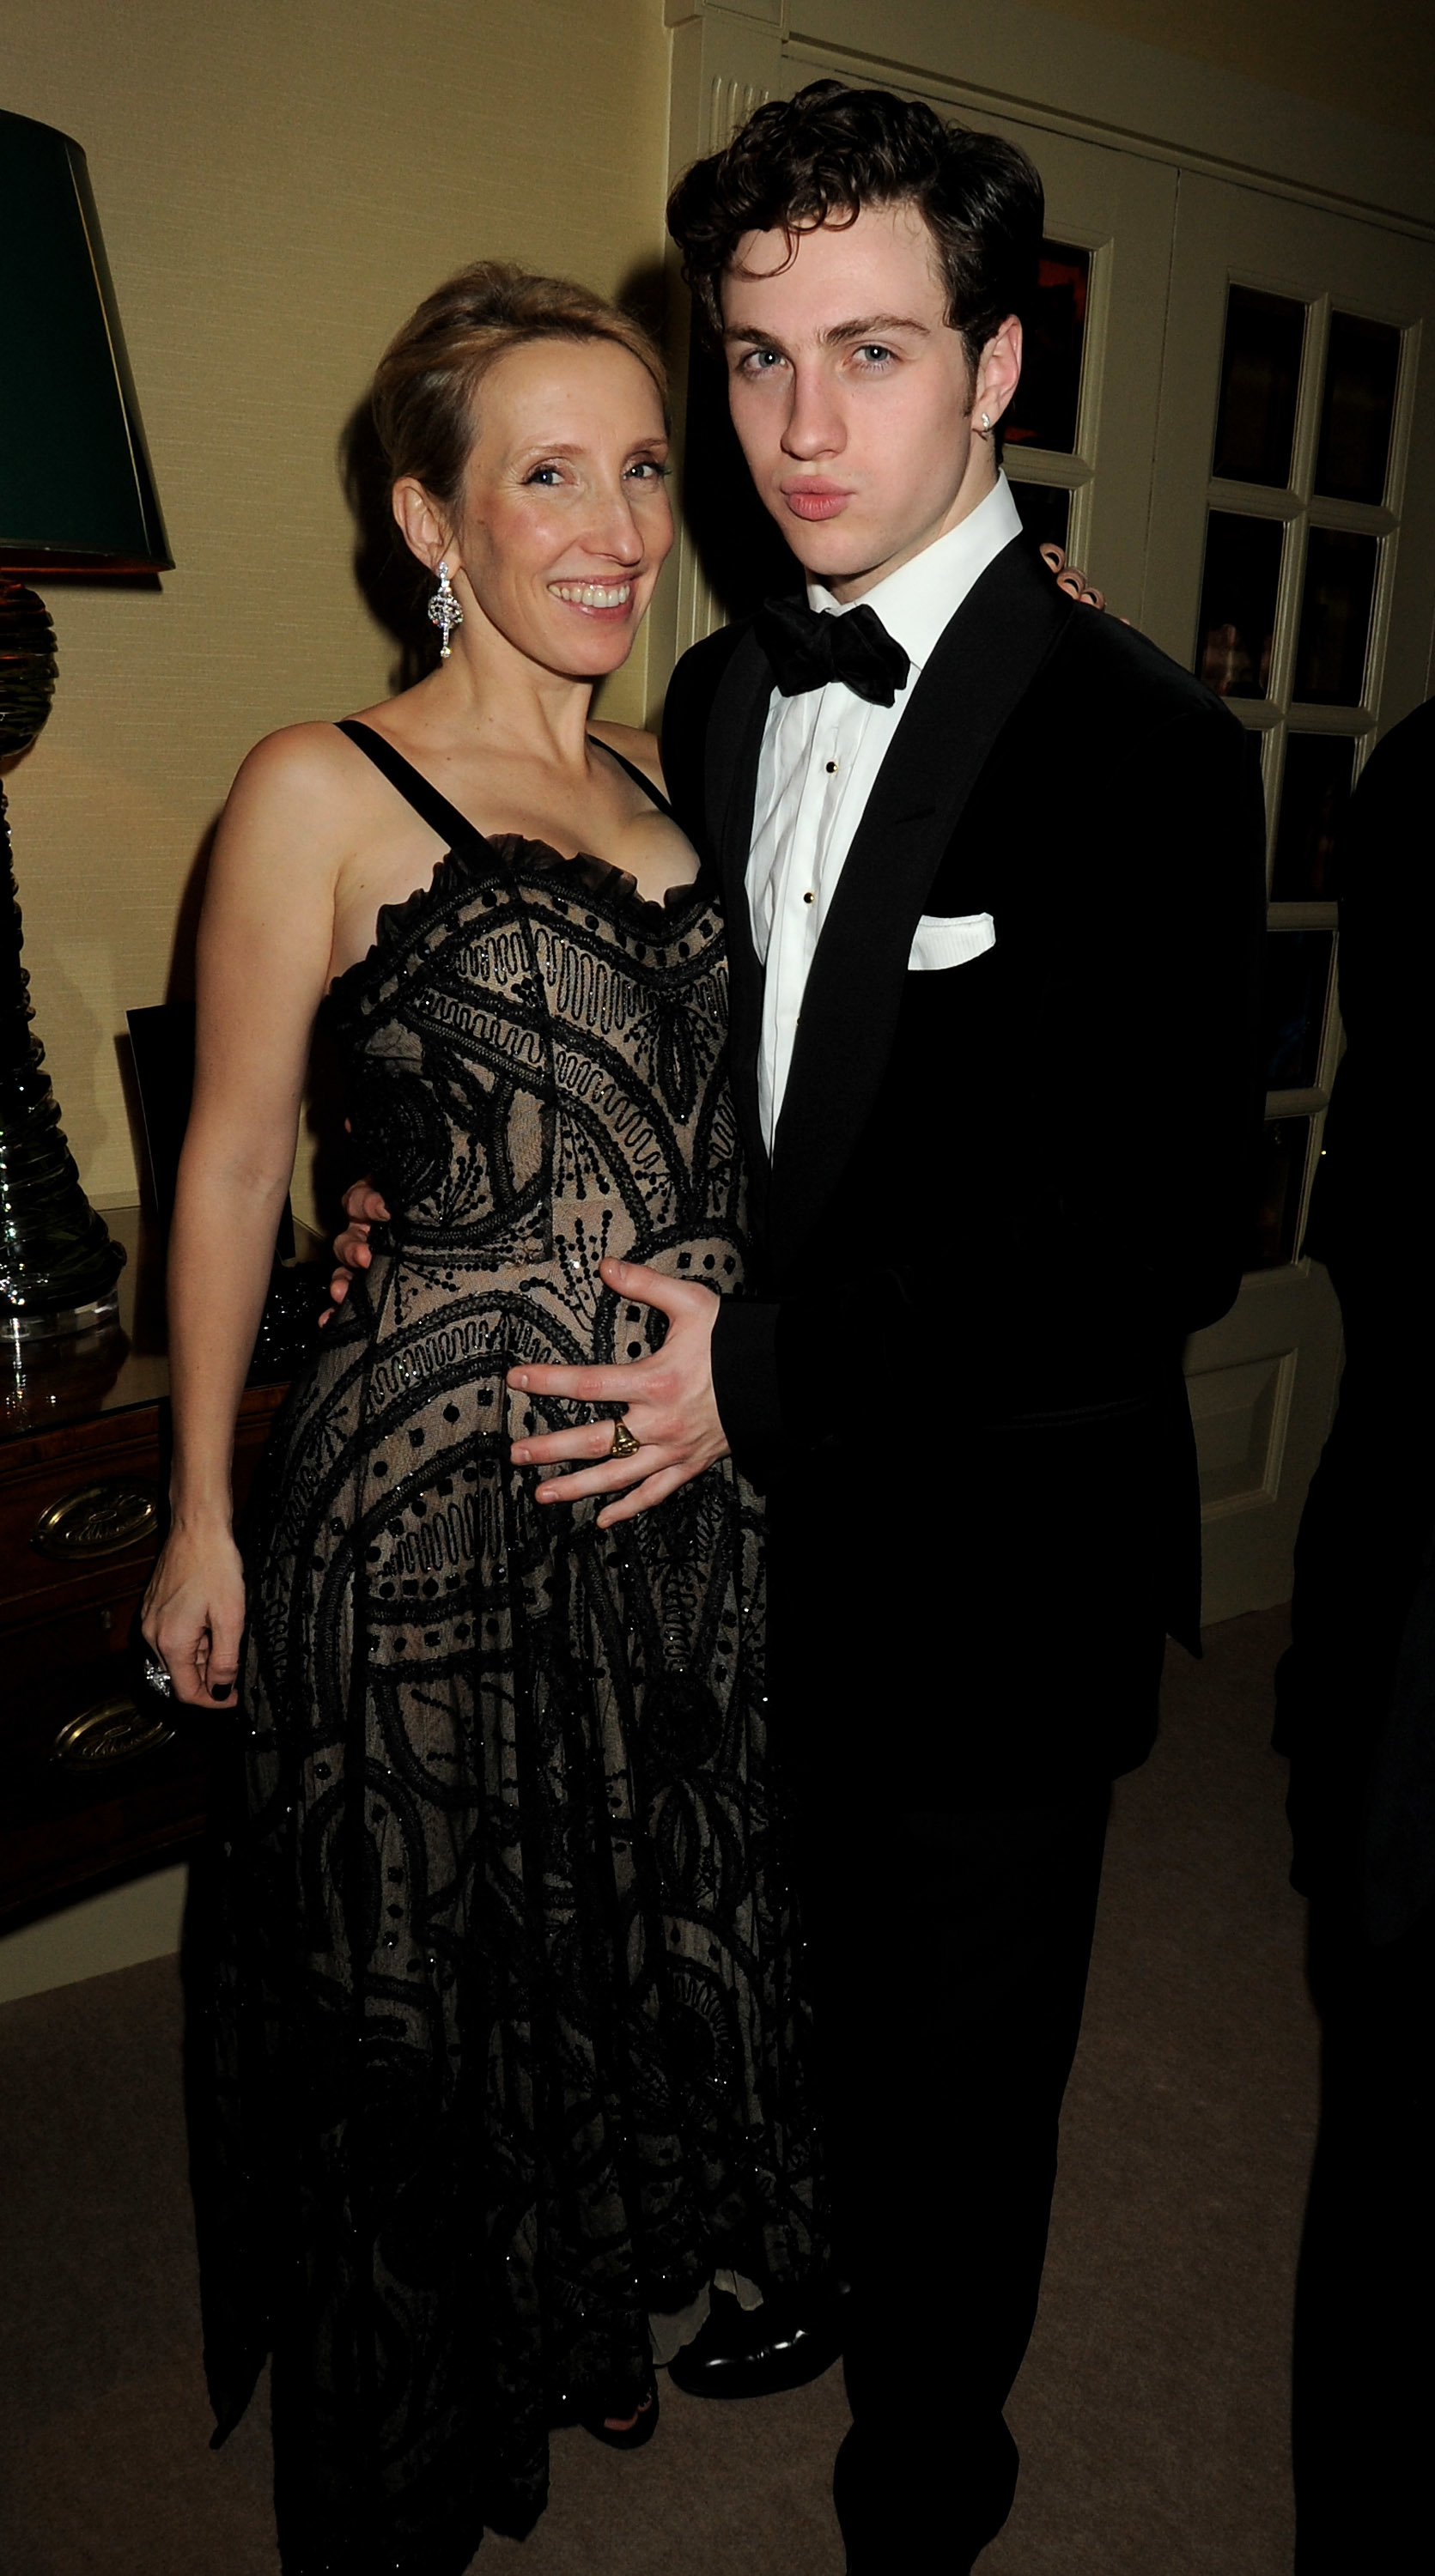 A pregnant Sam and Aaron Taylor-Johnson at a formal event smiling for a photo